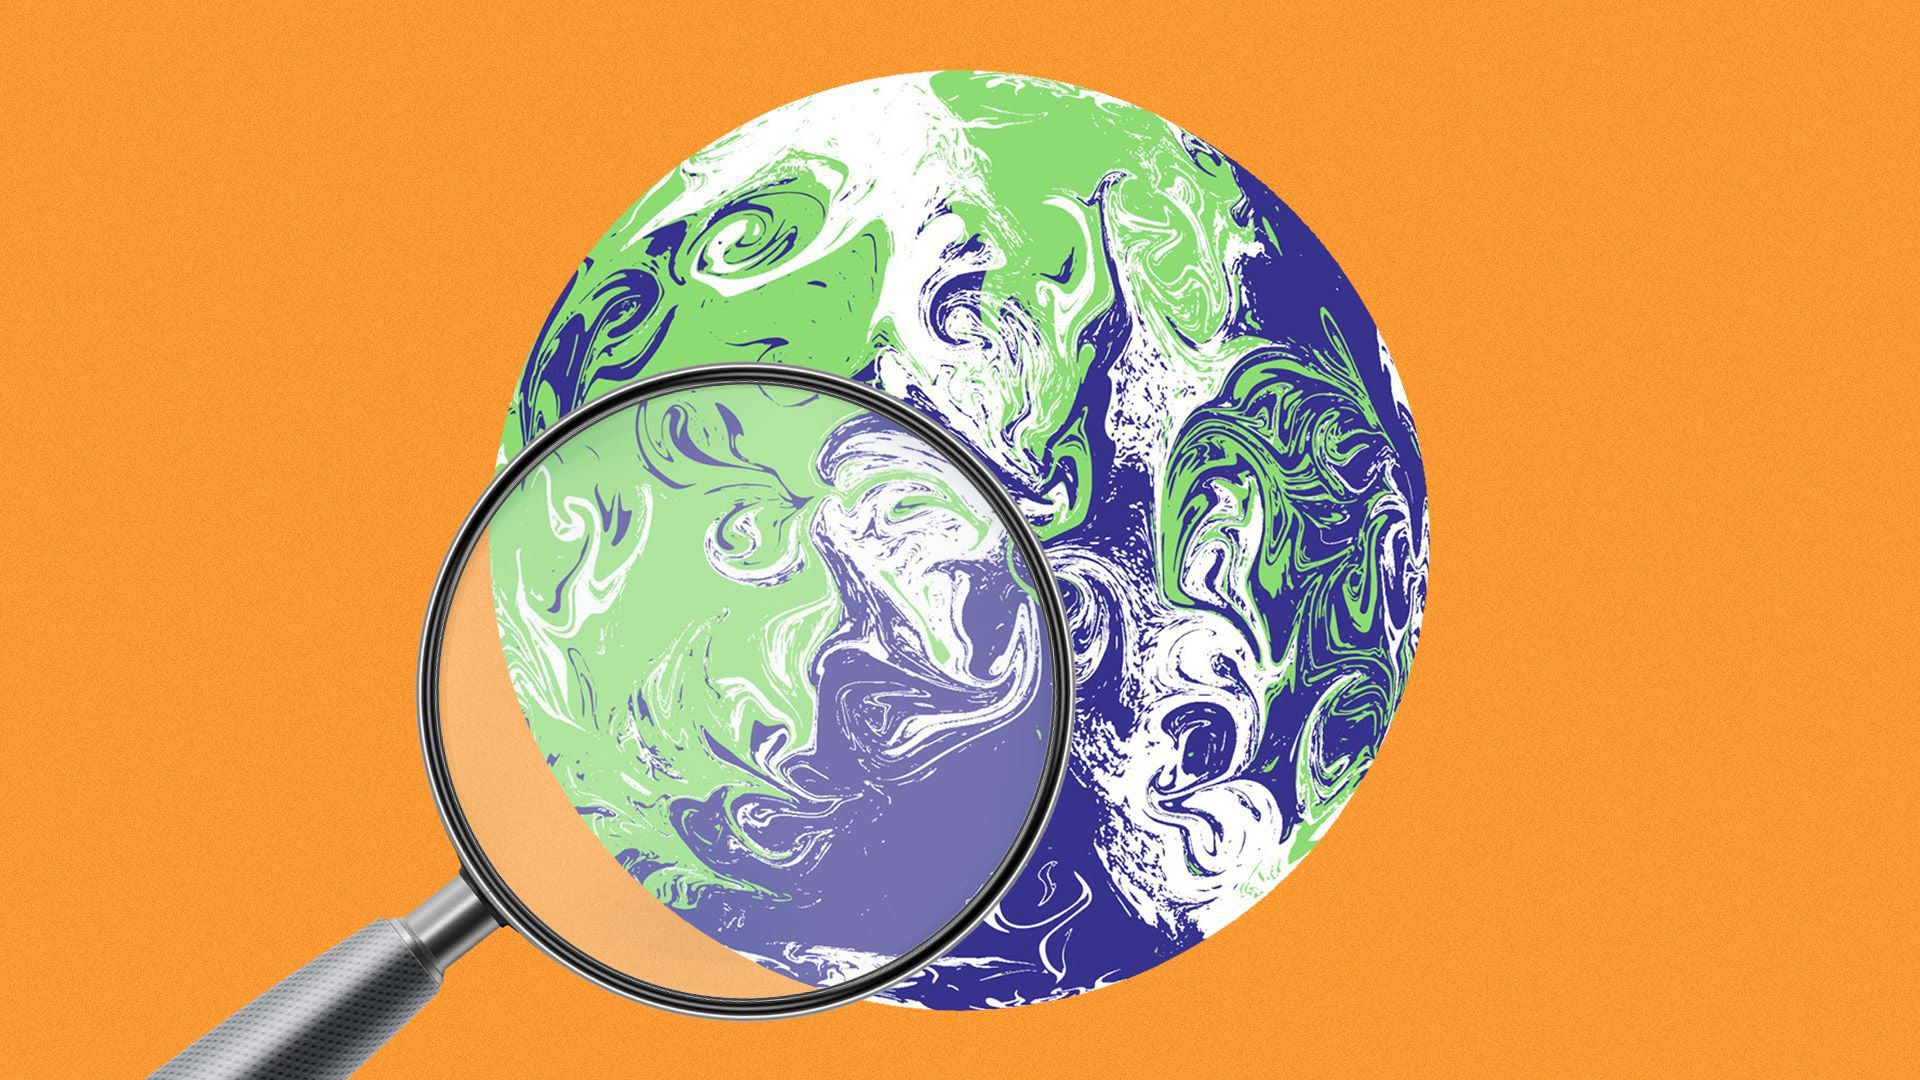 Illustration of a globe with a magnifying glass.